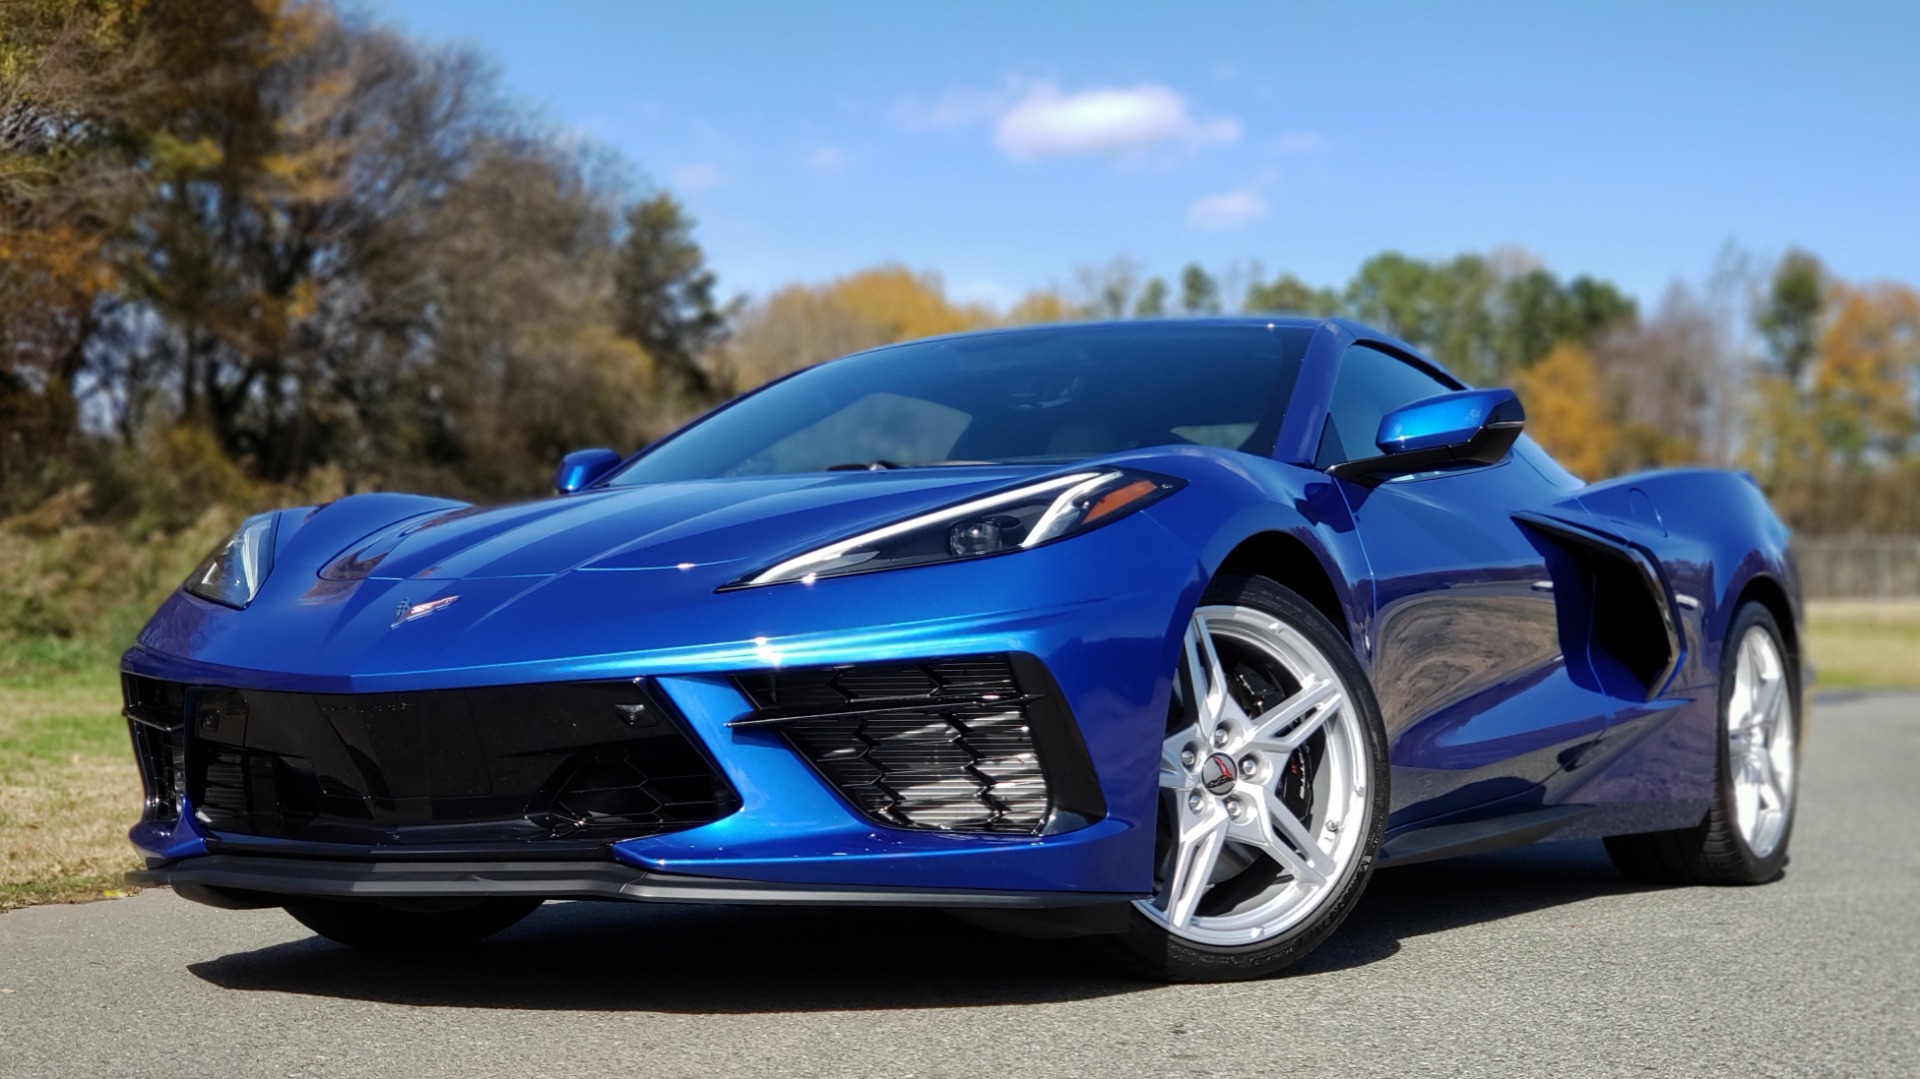 Used 2020 Chevrolet C8 CORVETTE STINGRAY 2LT COUPE / NAV / HUD / BOSE / GT2 SEATS / FRONT LIFT / REARVIEW for sale Sold at Formula Imports in Charlotte NC 28227 2